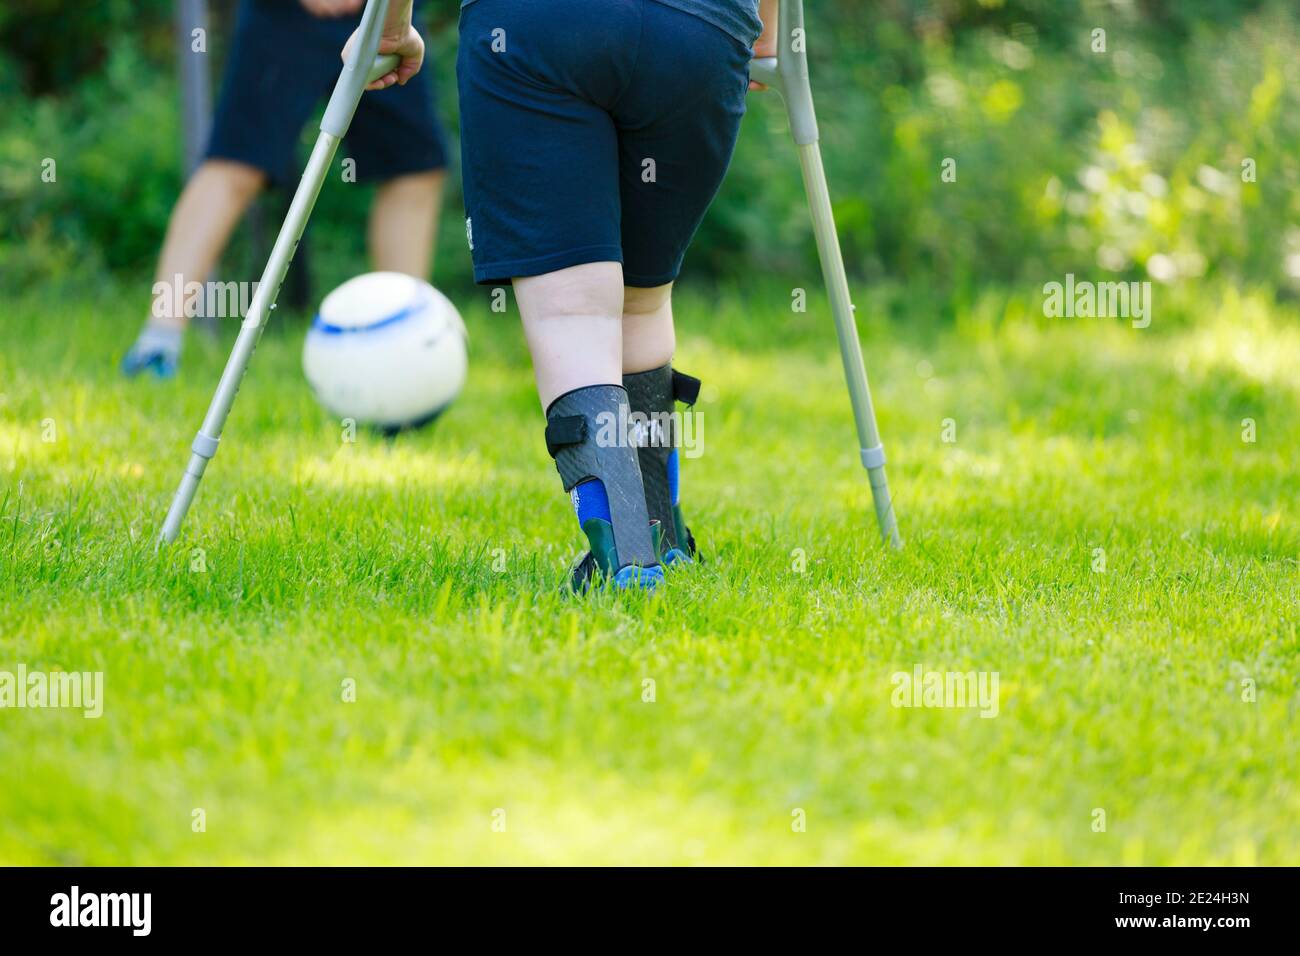 Low section of child using crutches playing football Stock Photo